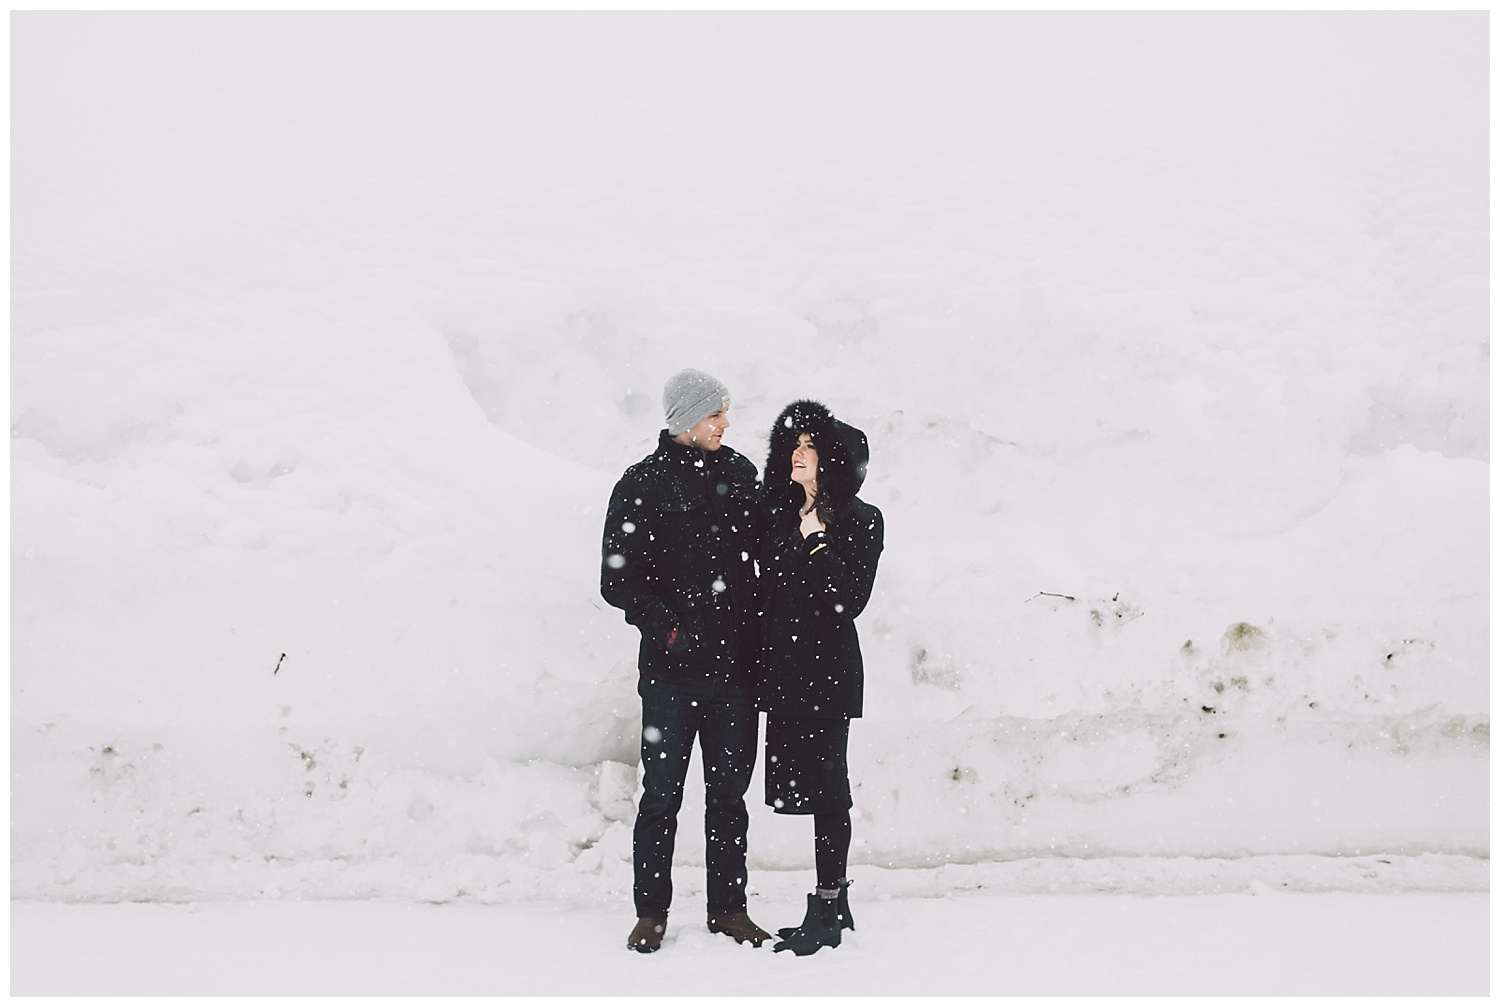 Very snowy for their engagement photos